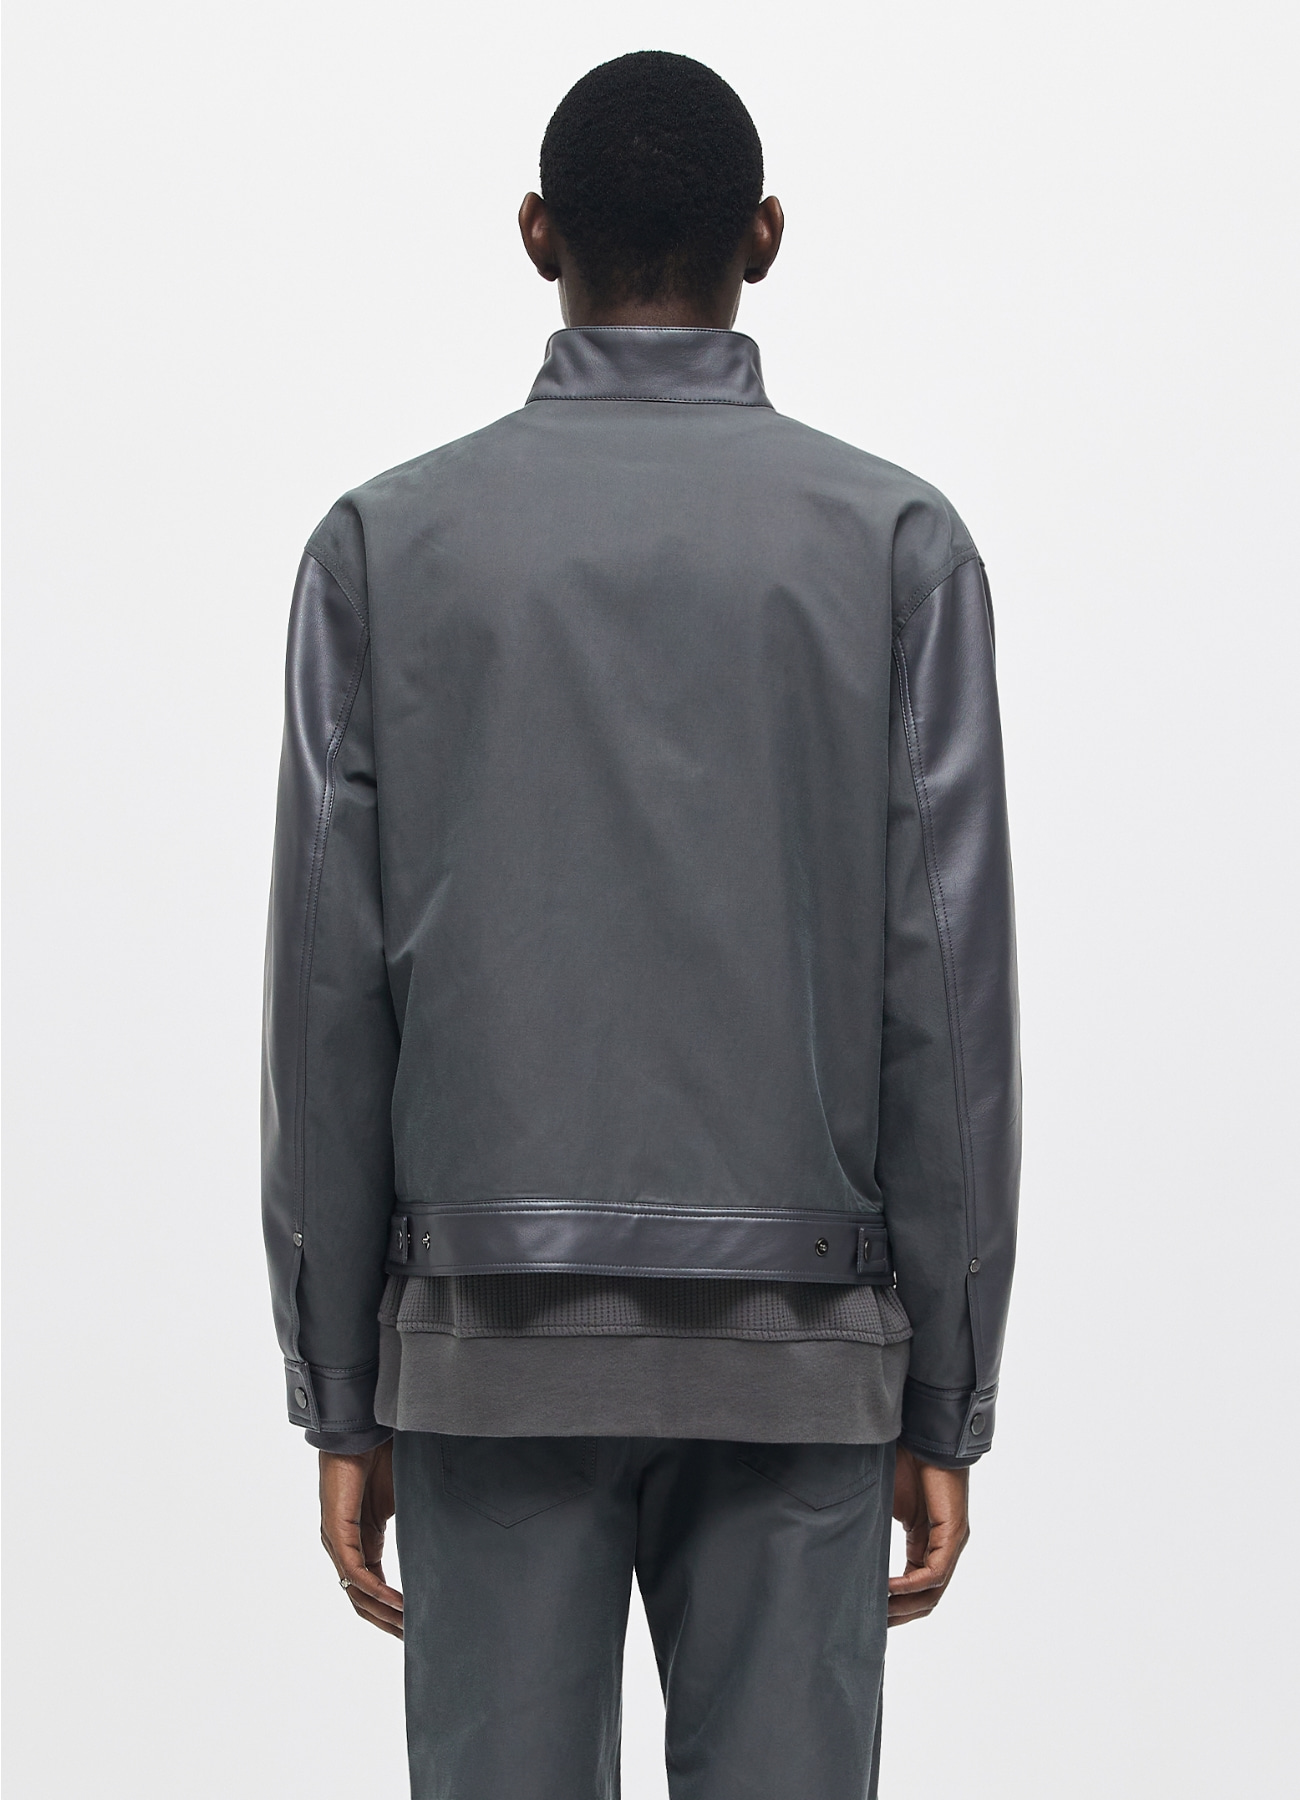 FRONT LEATHER MIX JACKET CHARCOAL